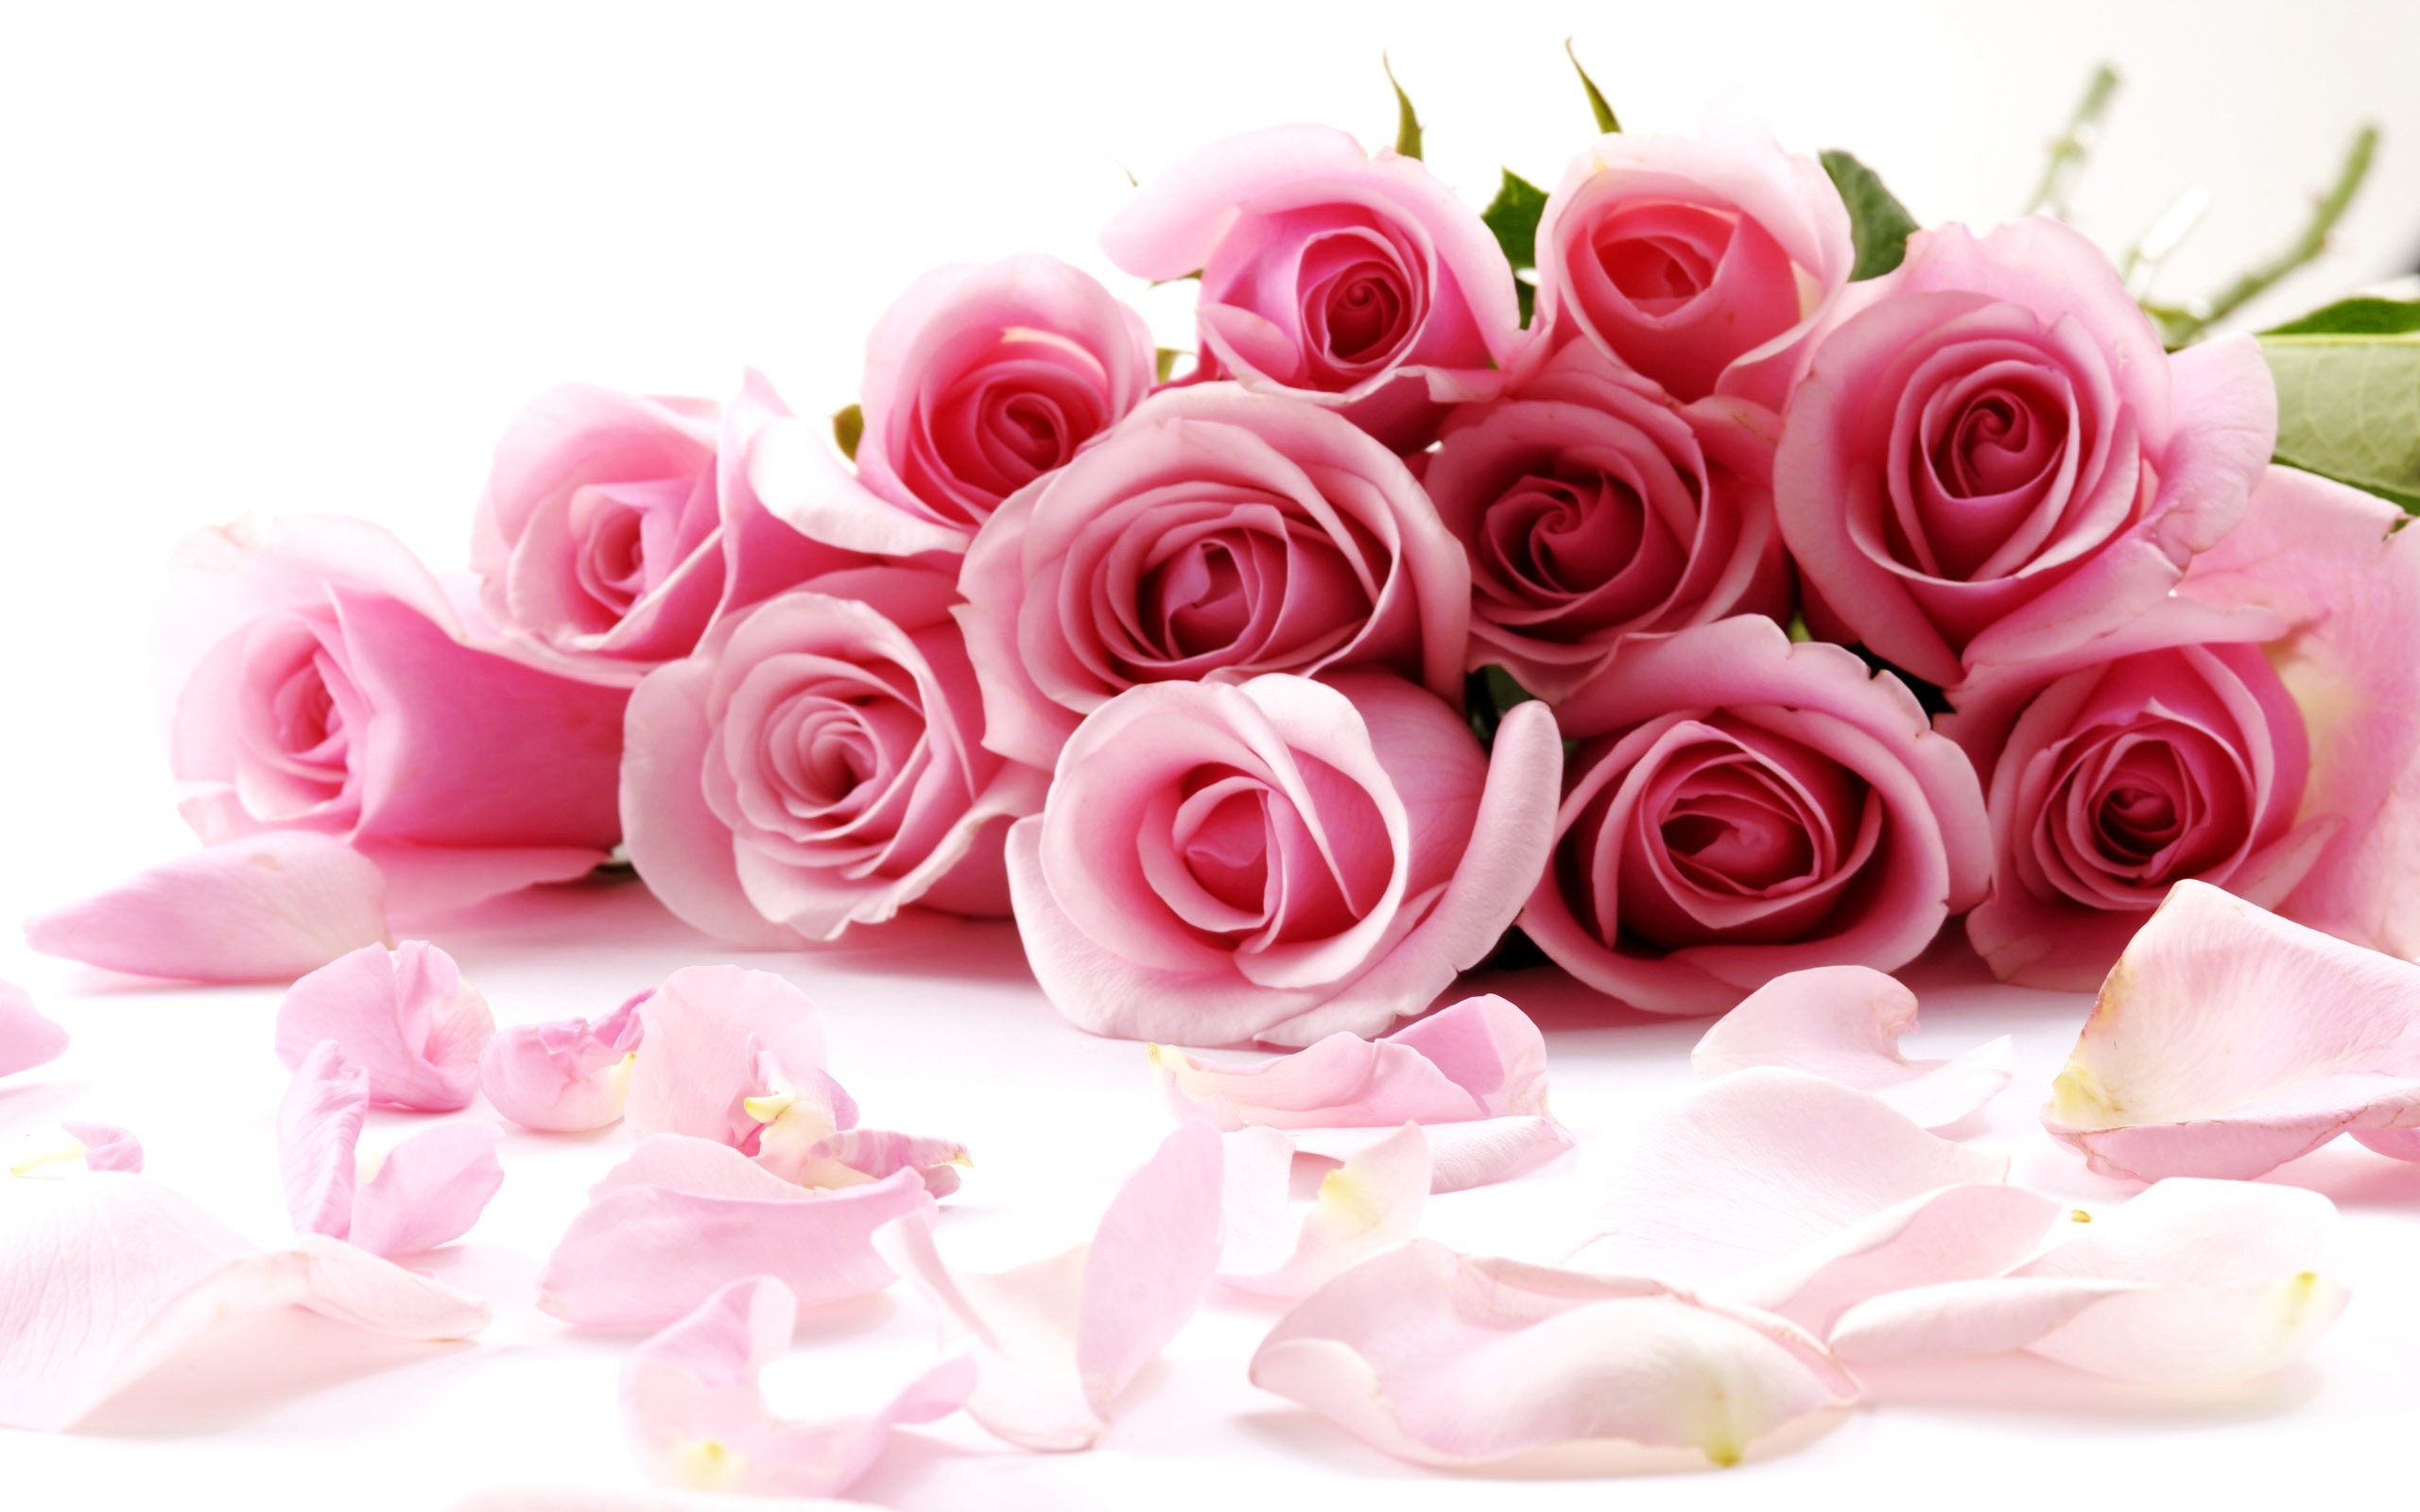 Pink Roses Isolated on White Background Photo and Desktop Wallpaper